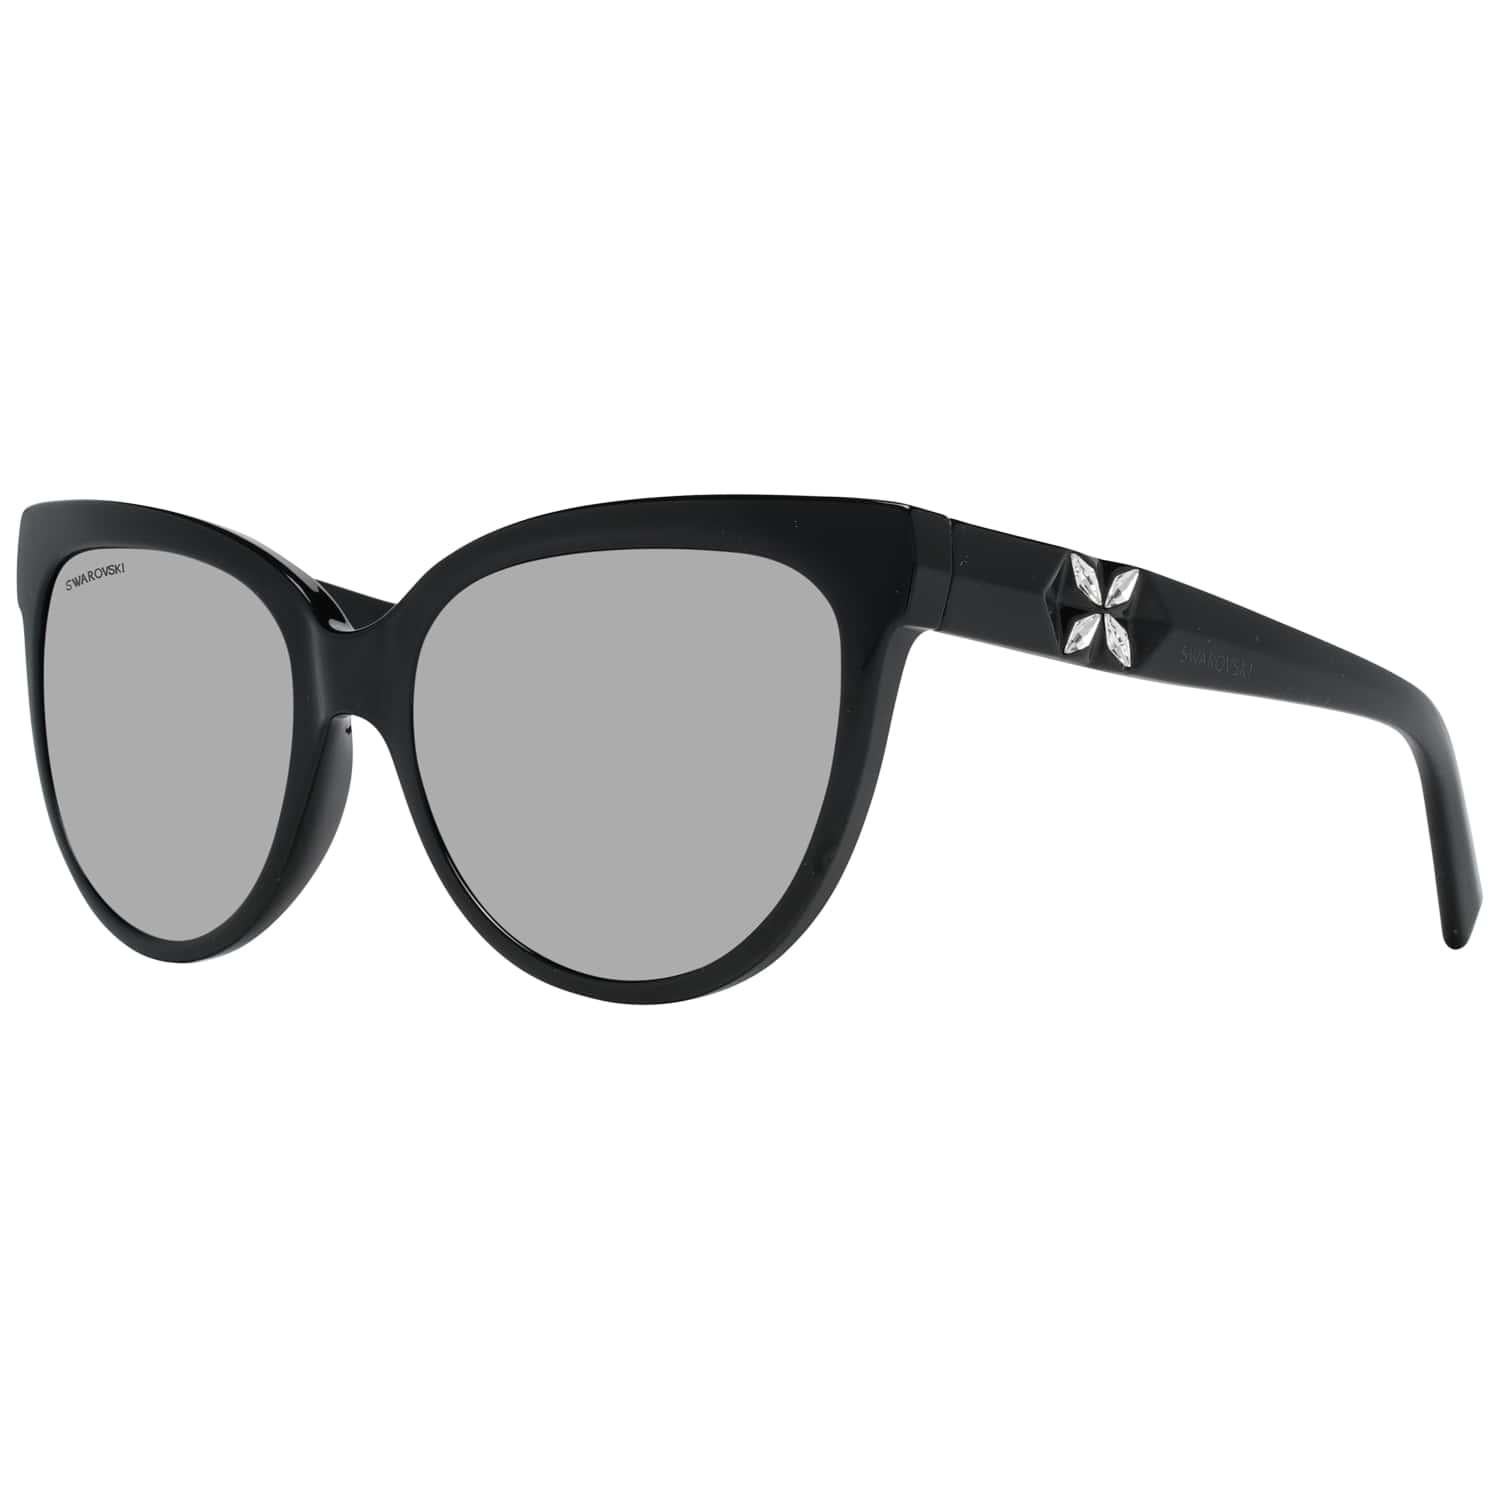 DetailsMATERIAL: AcetateCOLOR: BlackMODEL: SK0187 5601BGENDER: WomenCOUNTRY OF MANUFACTURE: ChinaTYPE: SunglassesORIGINAL CASE?: YesSTYLE: Cat EyeOCCASION: CasualFEATURES: LightweightLENS COLOR: GreyLENS TECHNOLOGY: GradientYEAR MANUFACTURED: